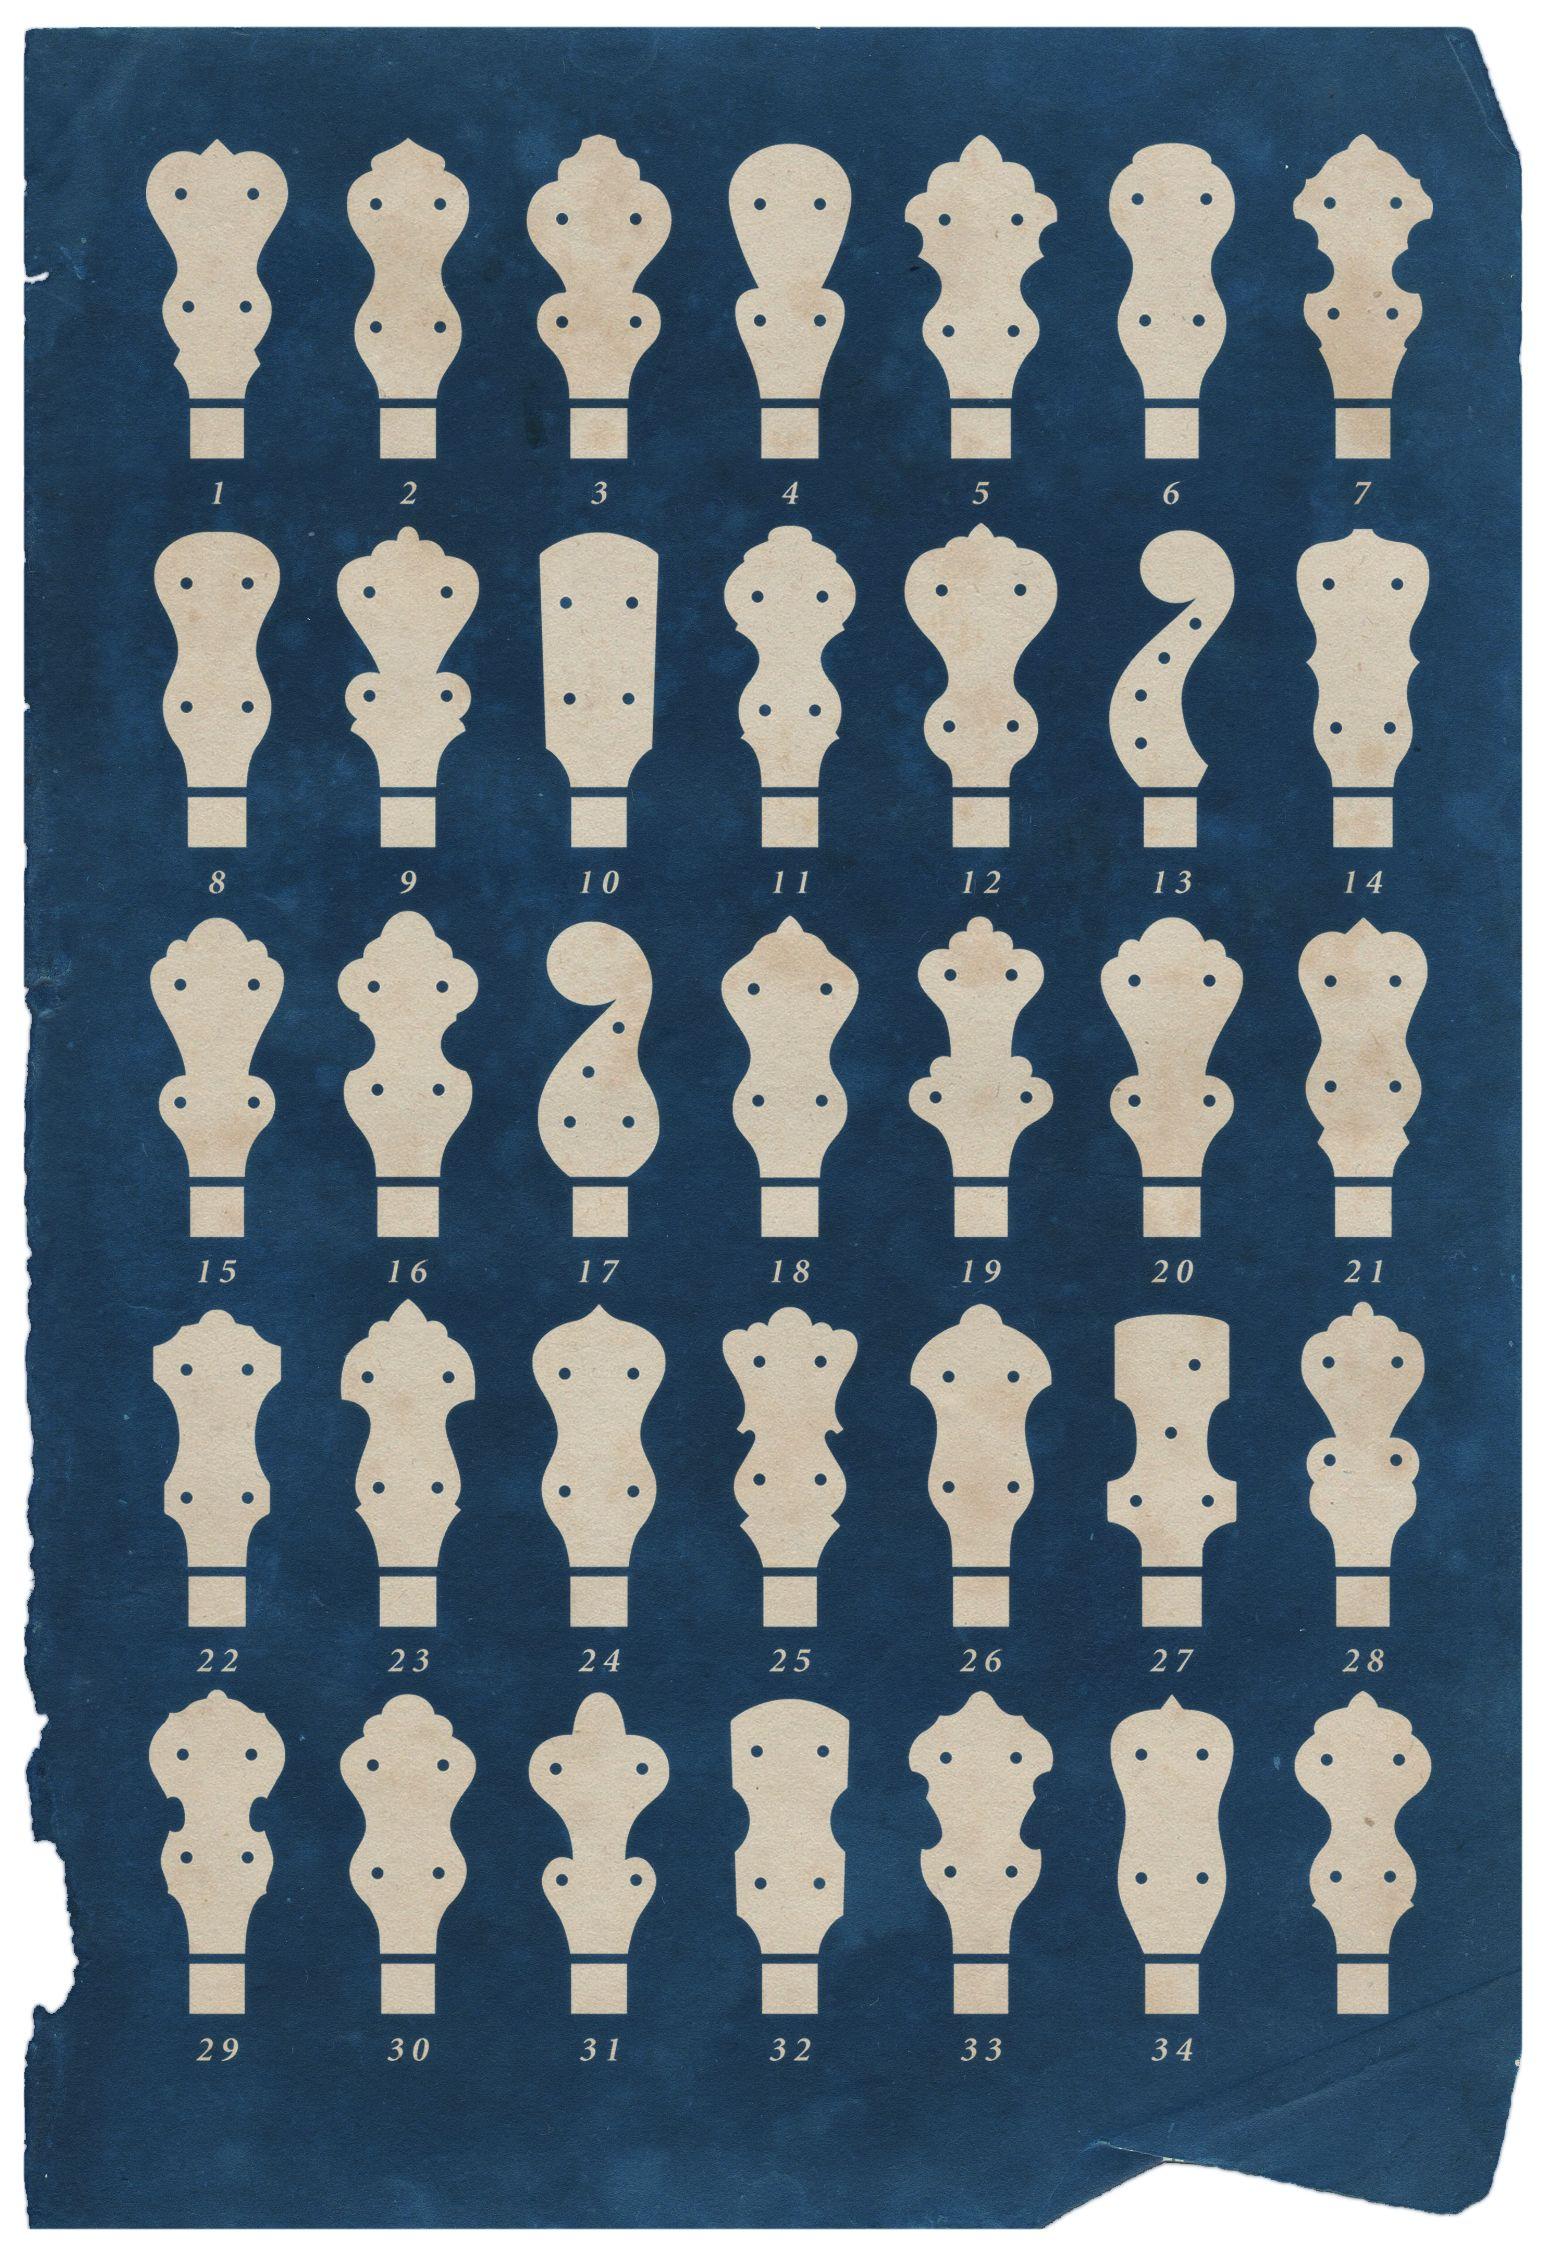 Banjo Headstock Logo - Banjo Peghead Design Chart by Oldgroove. | Banjos and other sweet ...